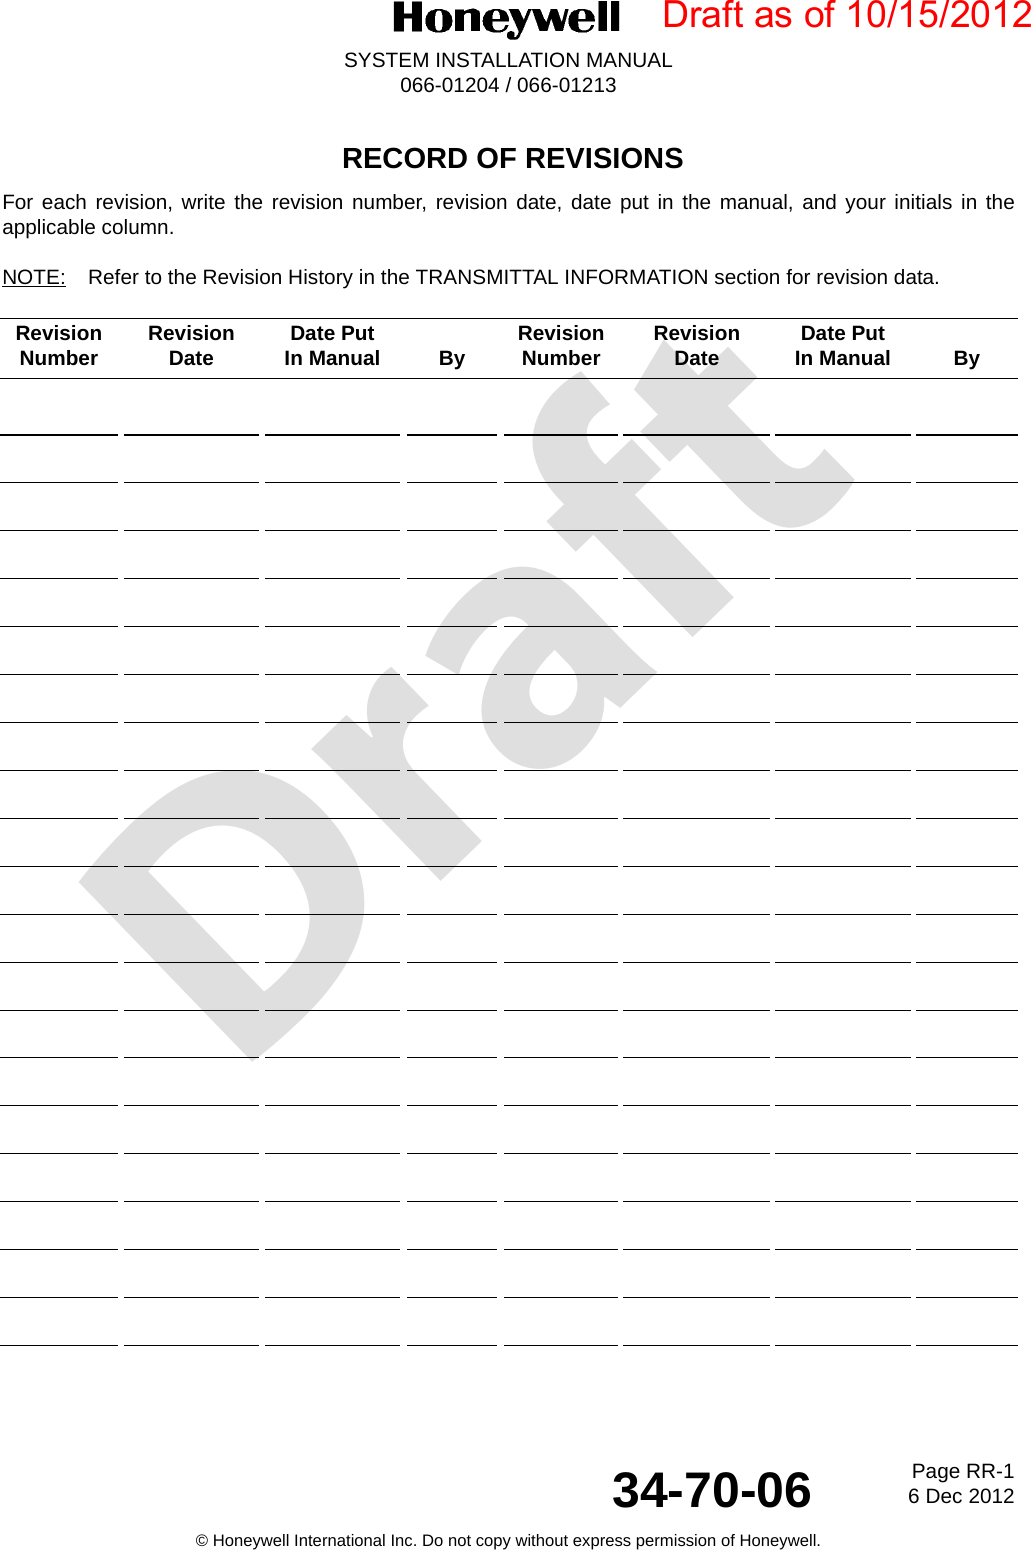 DraftPage RR-16 Dec 201234-70-06SYSTEM INSTALLATION MANUAL066-01204 / 066-01213© Honeywell International Inc. Do not copy without express permission of Honeywell. RECORD OF REVISIONSFor each revision, write the revision number, revision date, date put in the manual, and your initials in theapplicable column.NOTE: Refer to the Revision History in the TRANSMITTAL INFORMATION section for revision data.Revision Number  Revision Date  Date Put In Manual By  Revision Number  Revision Date  Date Put In Manual  By Draft as of 10/15/2012